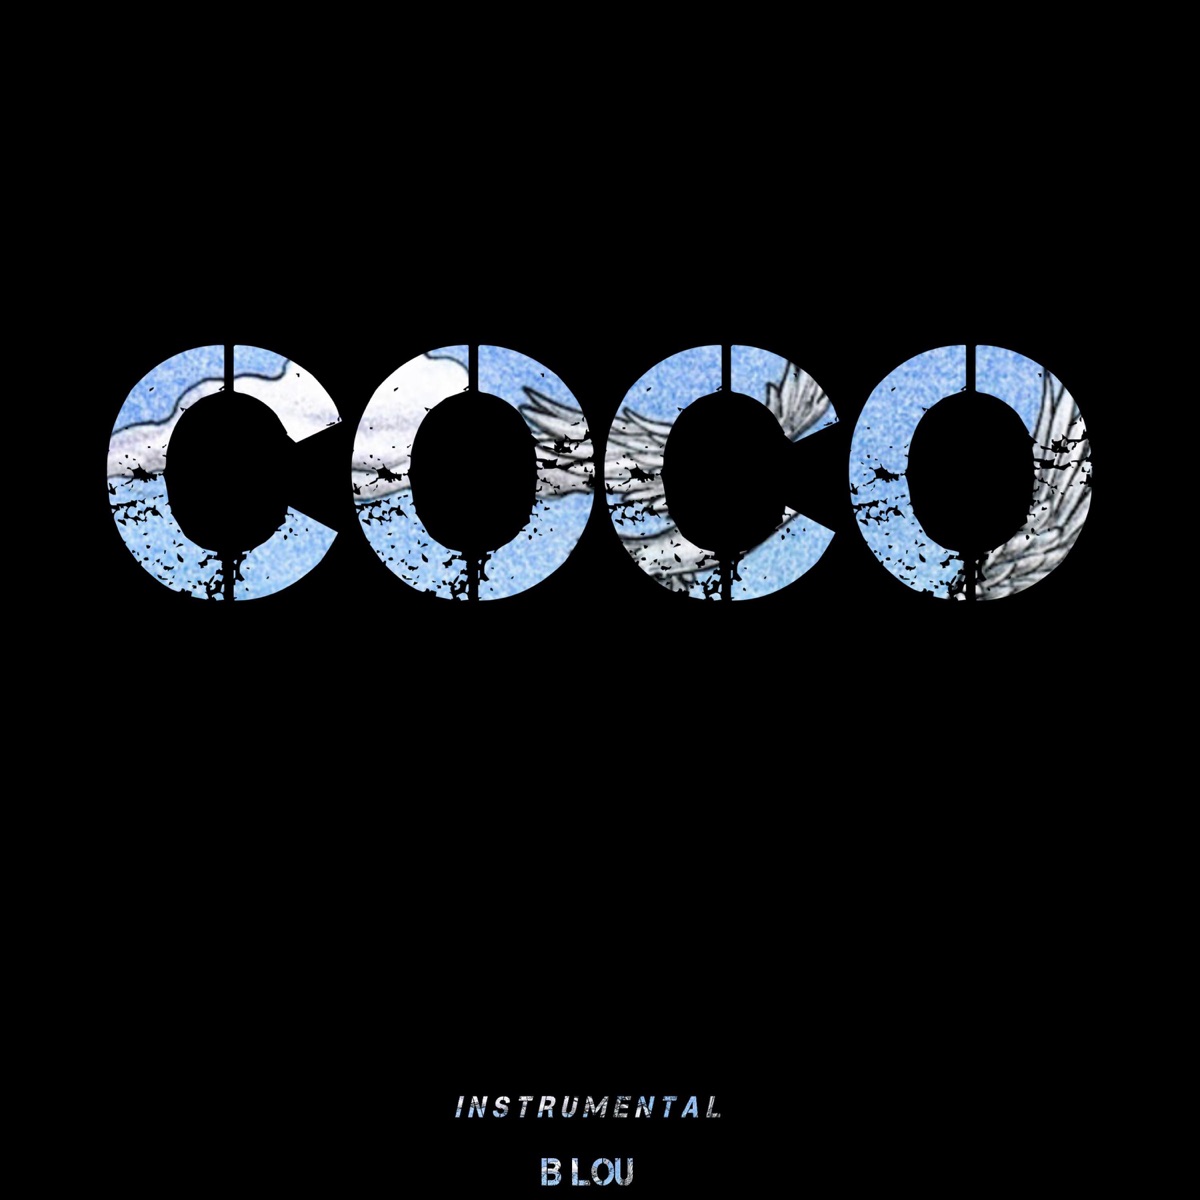 Coco (Instrumental) - Single by B Lou on Apple Music